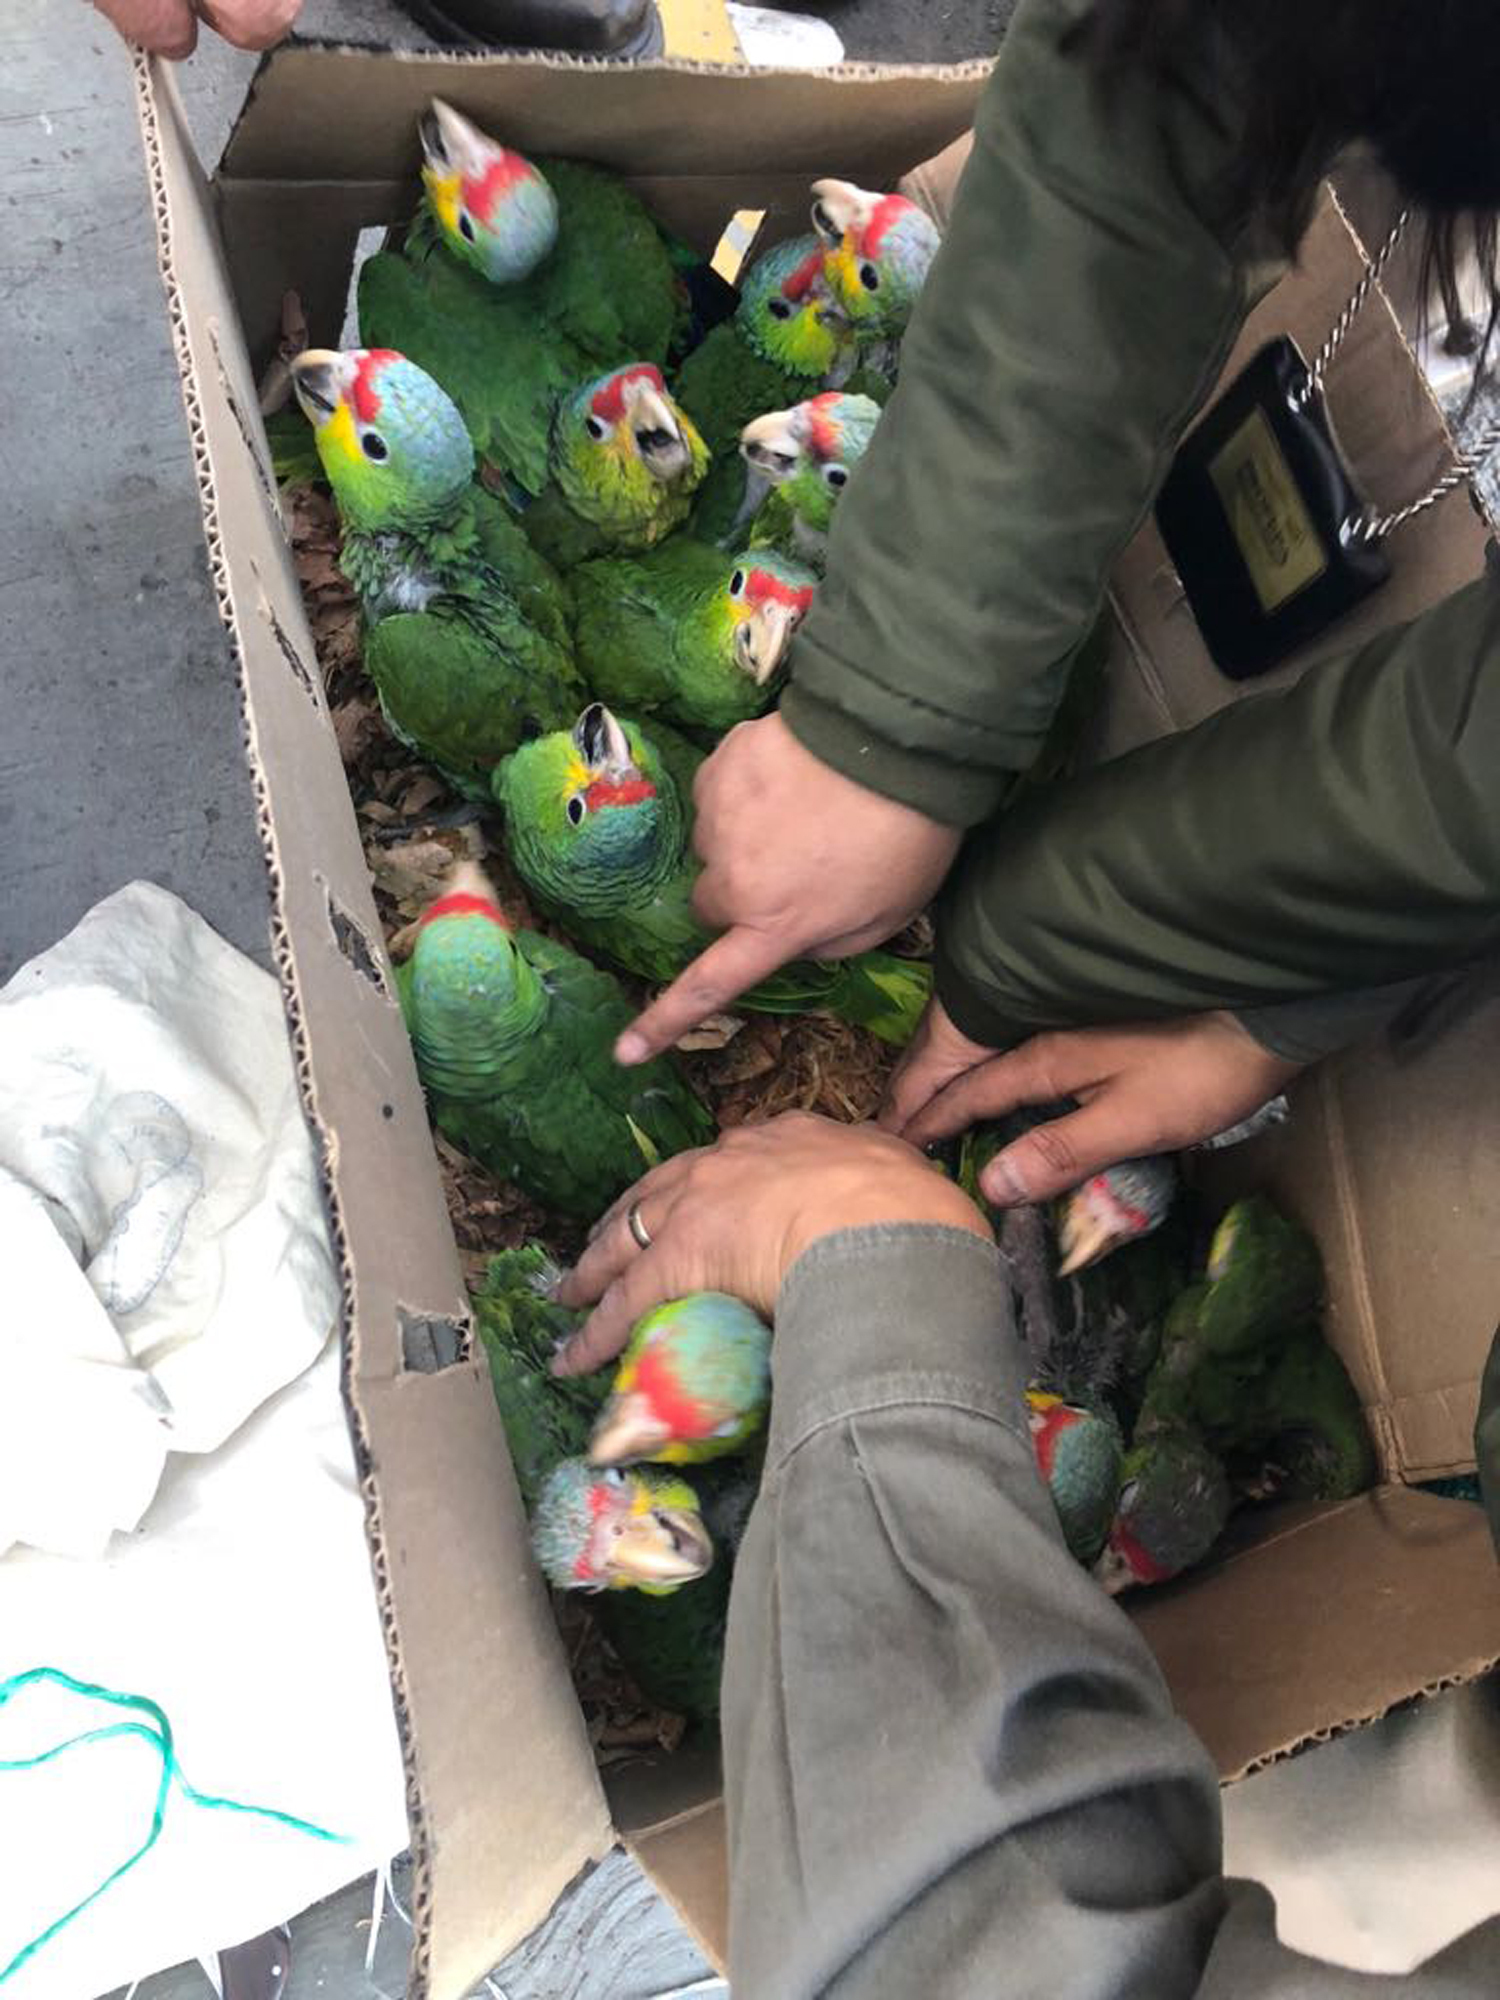 A box of Agapornis parrots are intercepted by Mexican police authorities